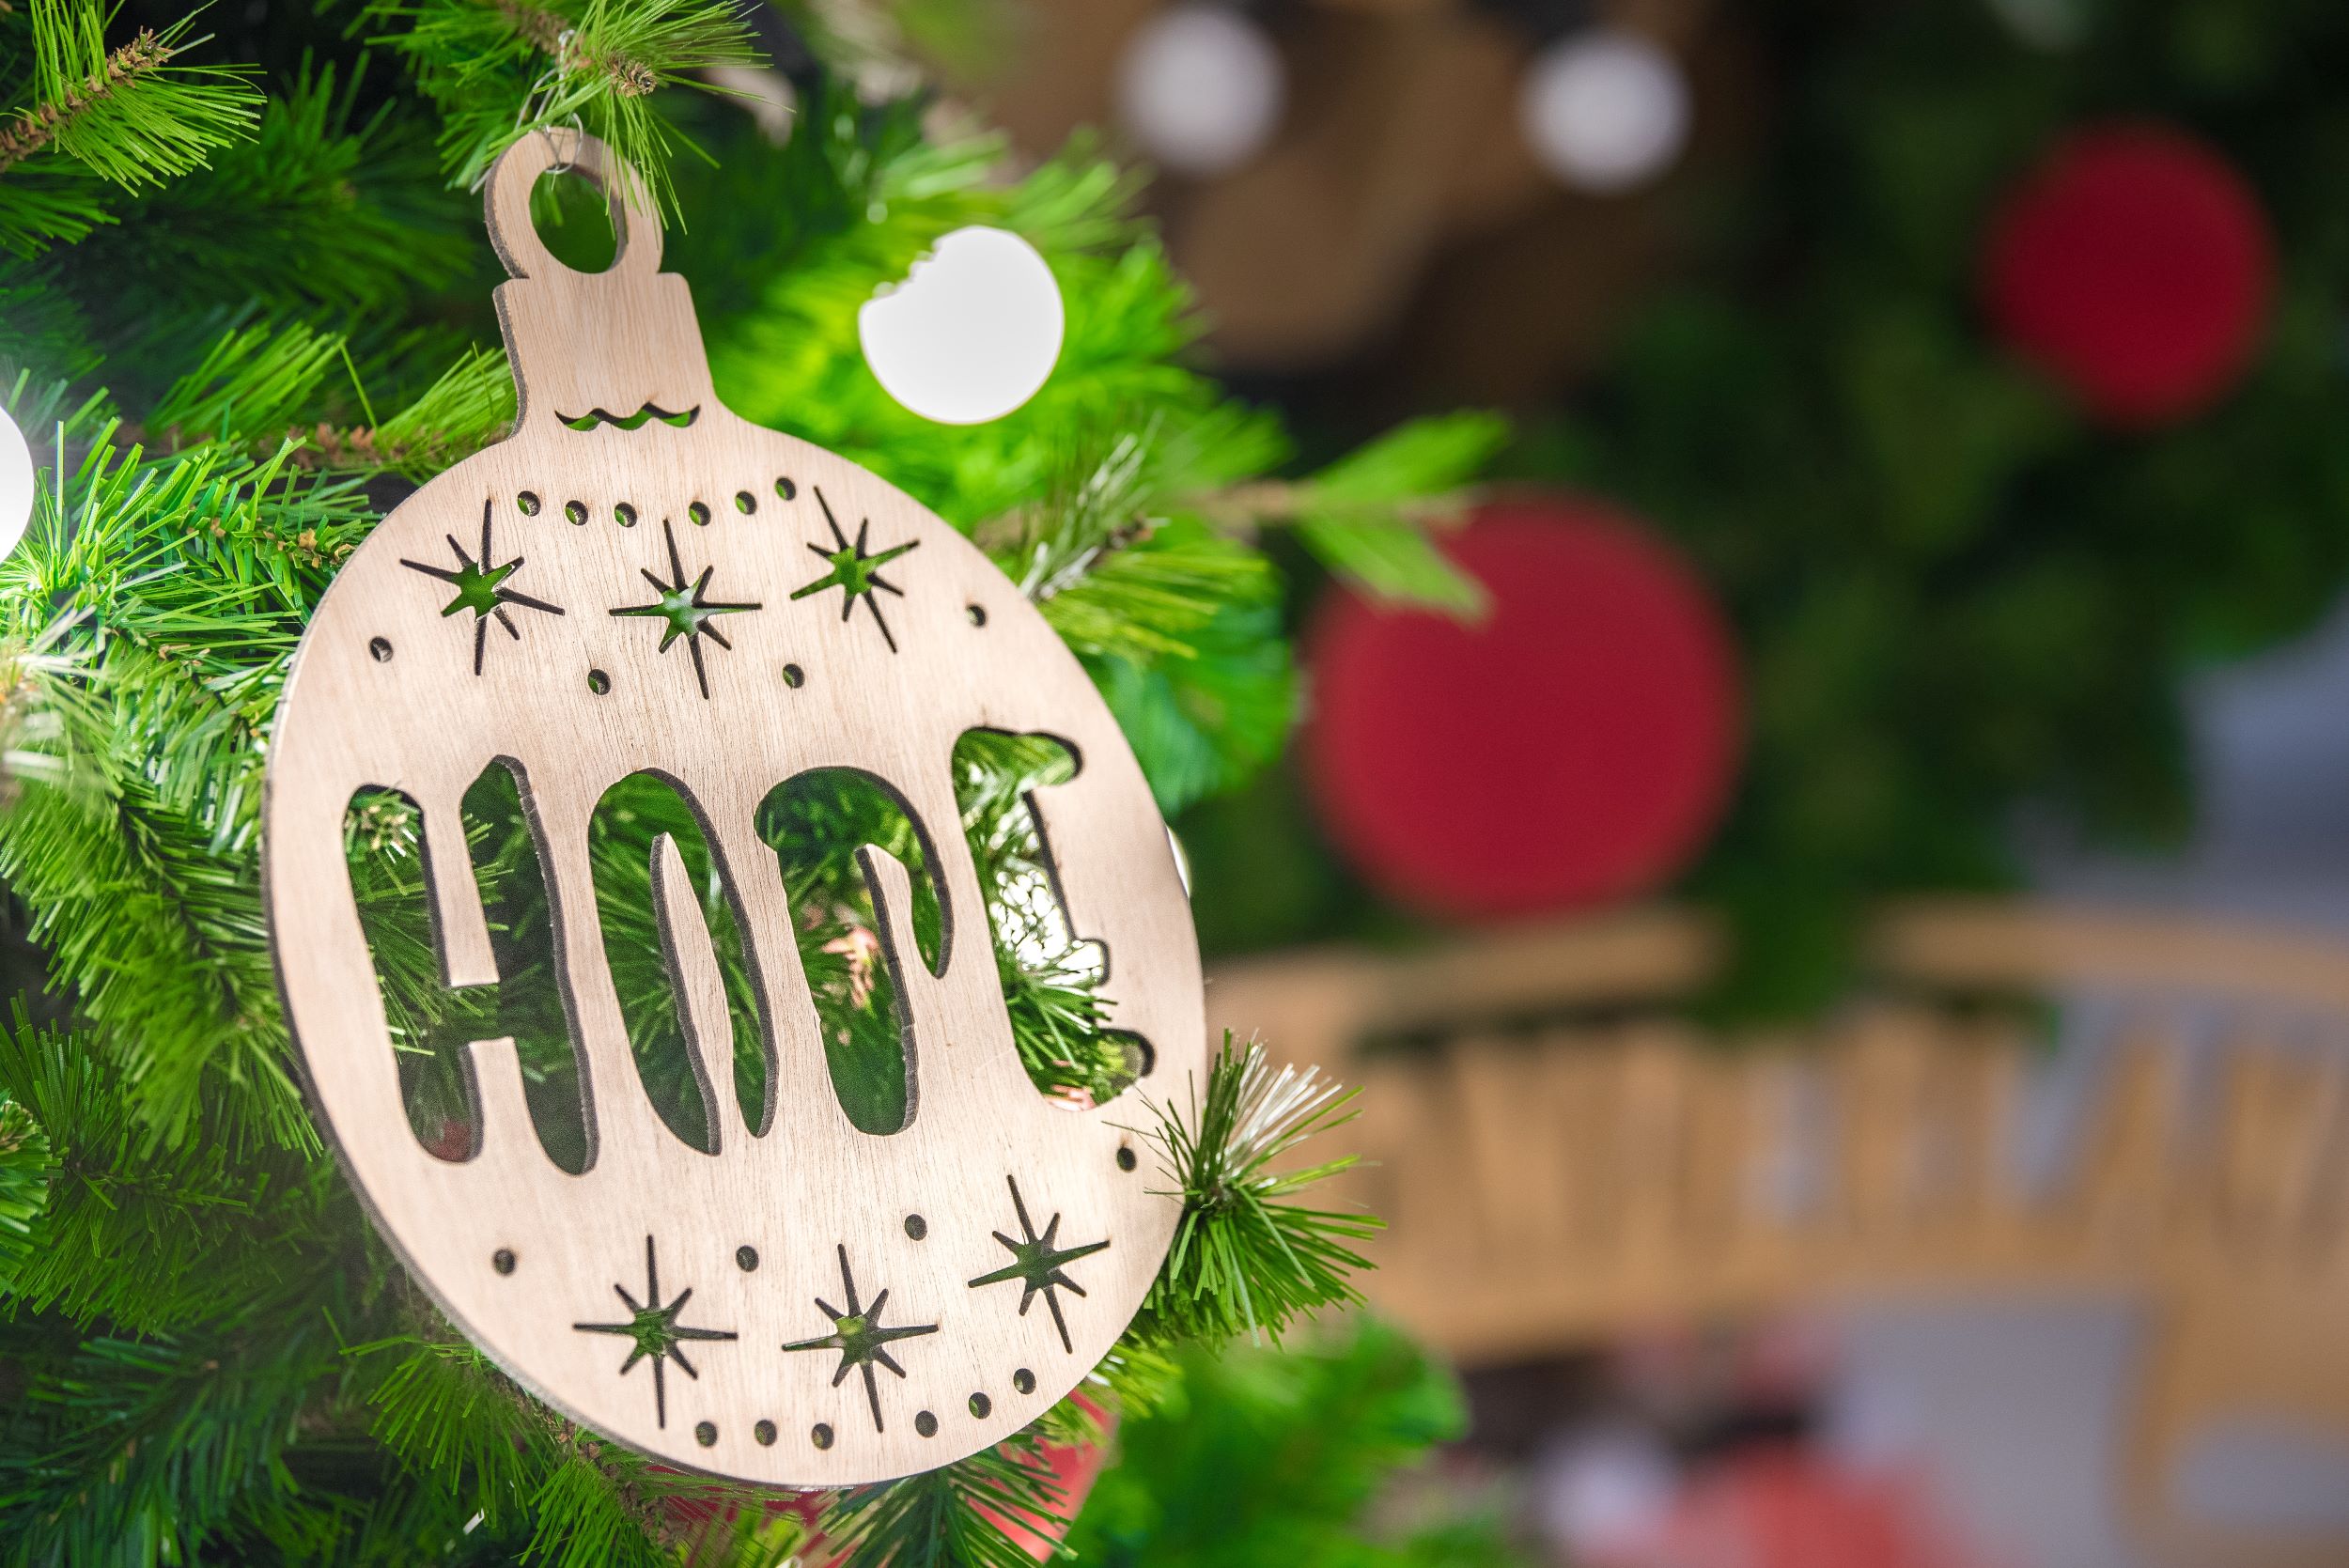 Wooden hope ornament on a Christmas tree